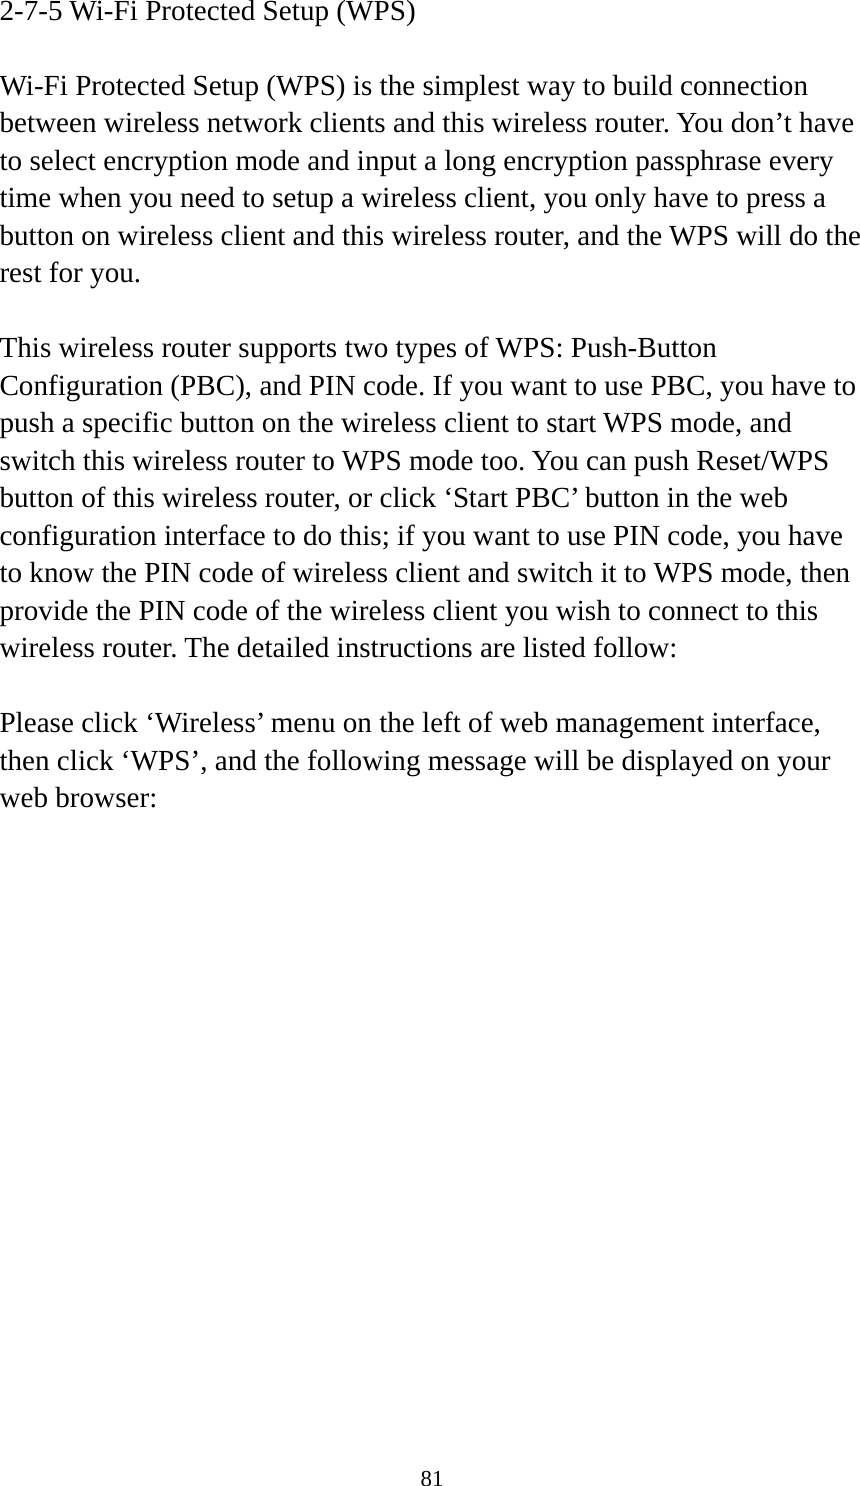 81 2-7-5 Wi-Fi Protected Setup (WPS)  Wi-Fi Protected Setup (WPS) is the simplest way to build connection between wireless network clients and this wireless router. You don’t have to select encryption mode and input a long encryption passphrase every time when you need to setup a wireless client, you only have to press a button on wireless client and this wireless router, and the WPS will do the rest for you.  This wireless router supports two types of WPS: Push-Button Configuration (PBC), and PIN code. If you want to use PBC, you have to push a specific button on the wireless client to start WPS mode, and switch this wireless router to WPS mode too. You can push Reset/WPS button of this wireless router, or click ‘Start PBC’ button in the web configuration interface to do this; if you want to use PIN code, you have to know the PIN code of wireless client and switch it to WPS mode, then provide the PIN code of the wireless client you wish to connect to this wireless router. The detailed instructions are listed follow:  Please click ‘Wireless’ menu on the left of web management interface, then click ‘WPS’, and the following message will be displayed on your web browser:  